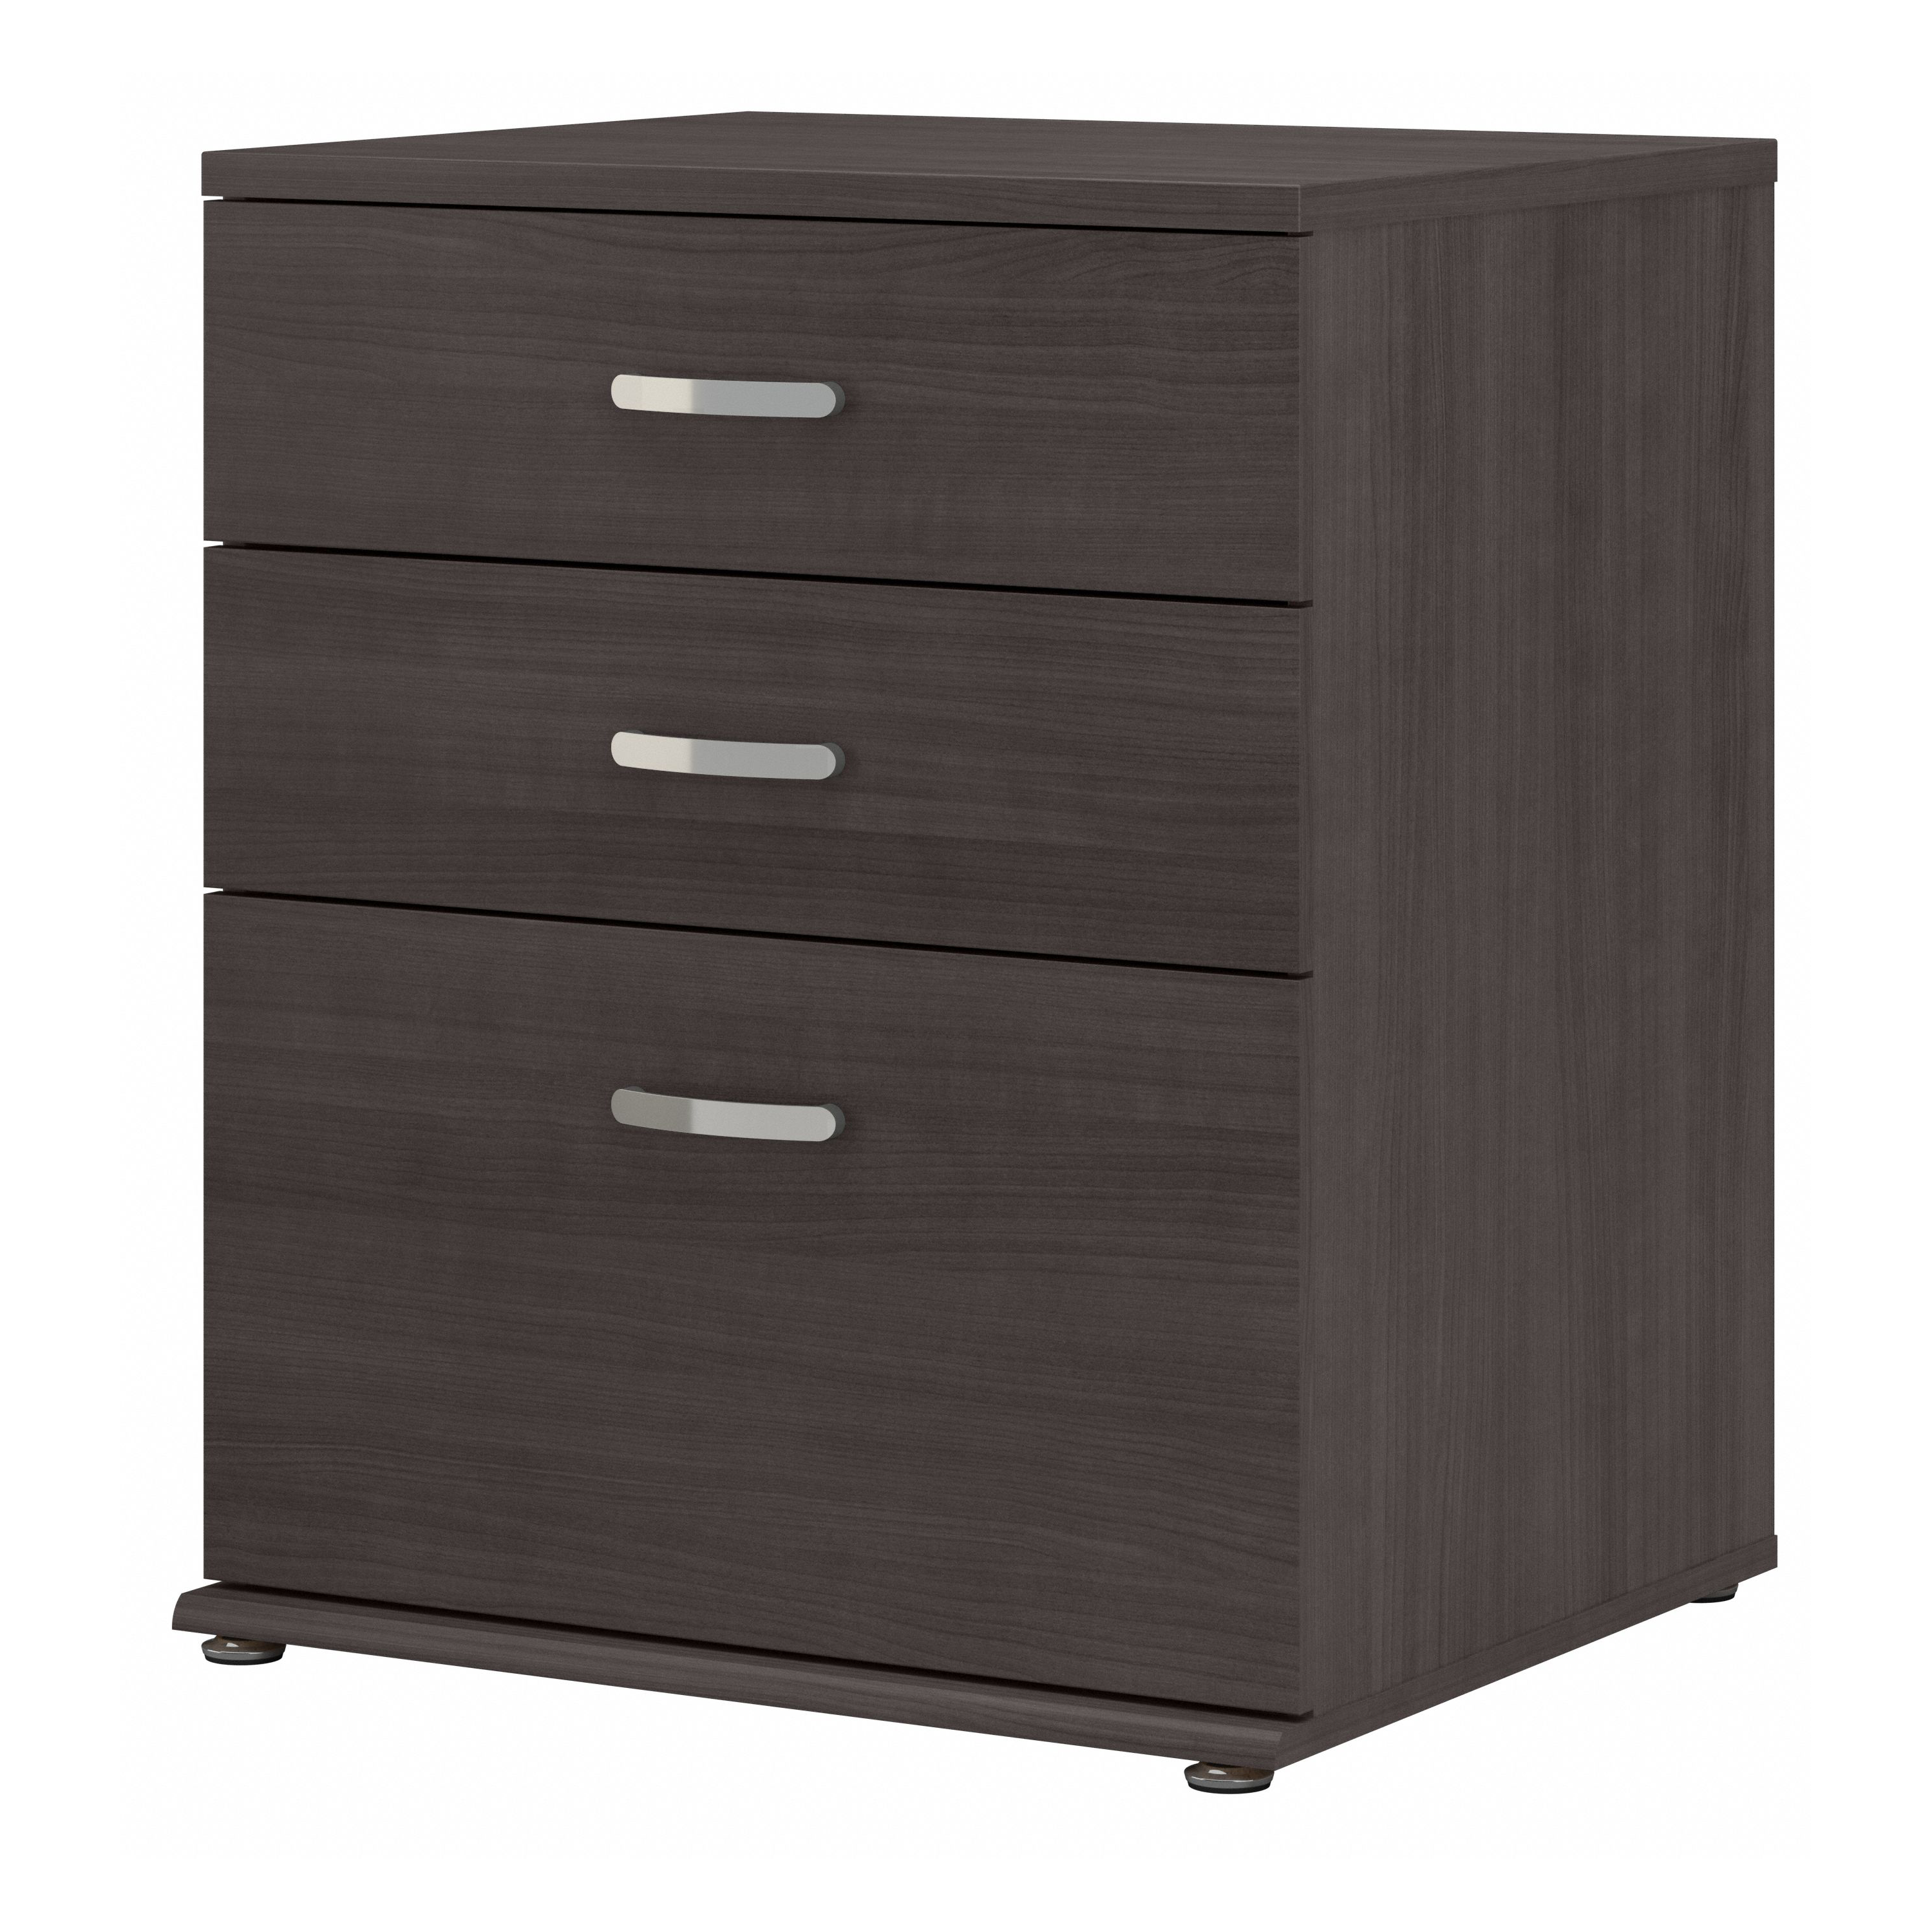 Shop Bush Business Furniture Universal Floor Storage Cabinet with Drawers 02 UNS328SG #color_storm gray